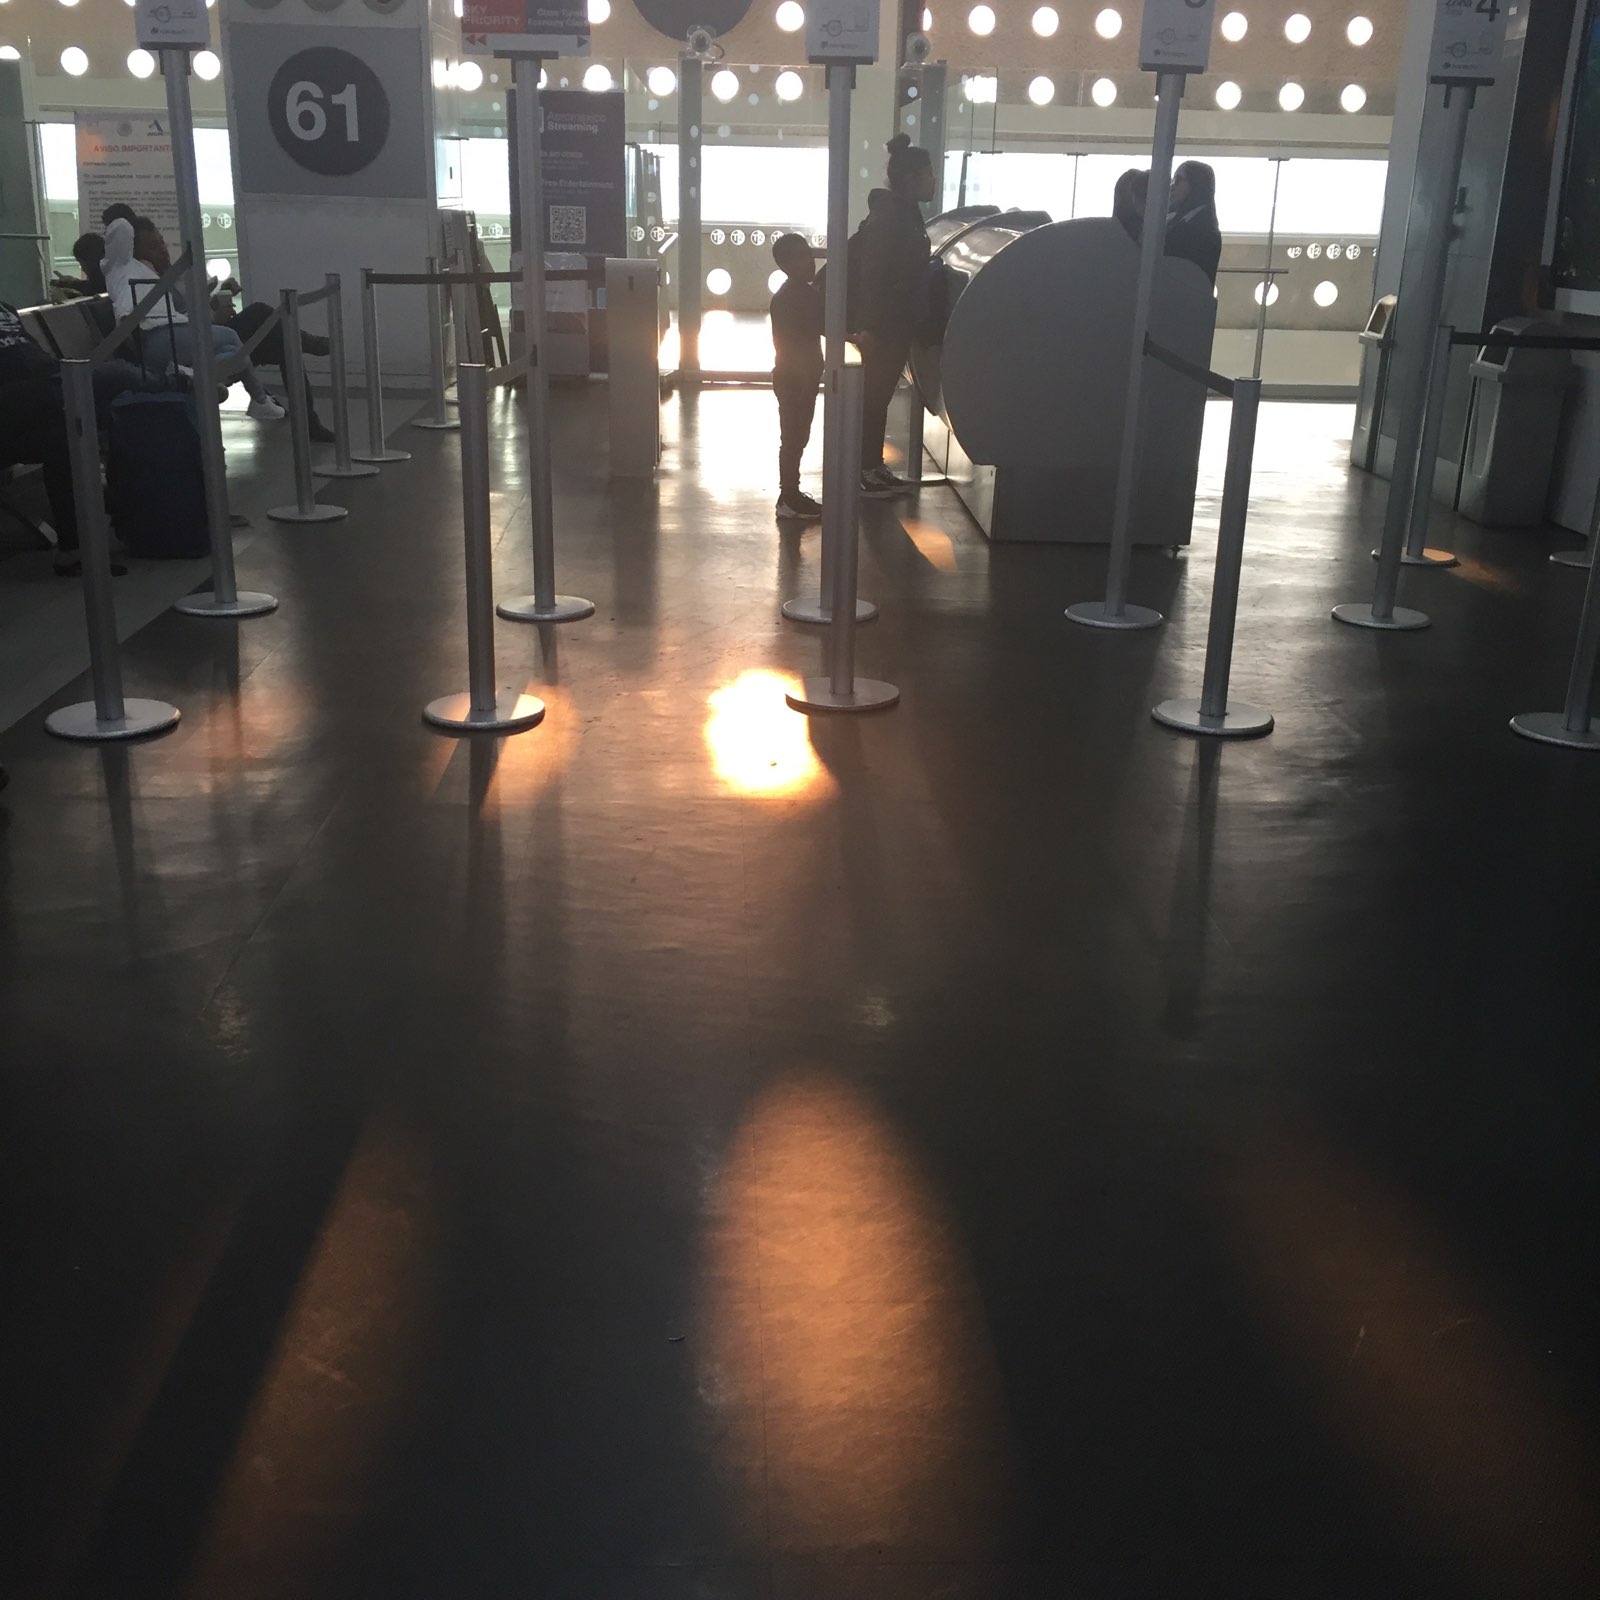 Sunset in the airport